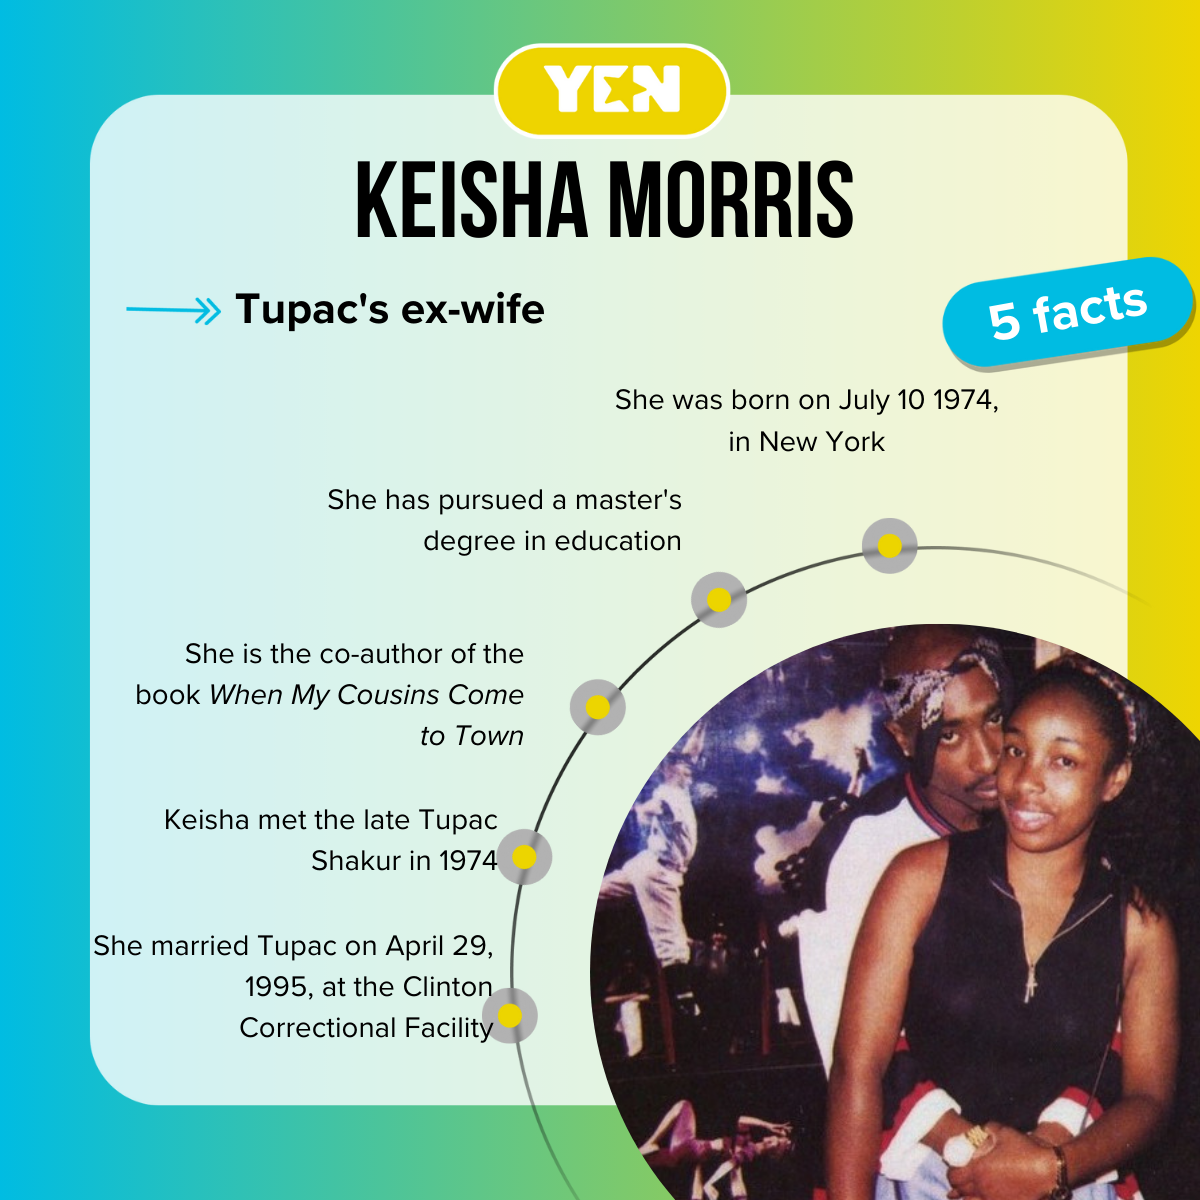 Top 5 facts about Keisha Morris